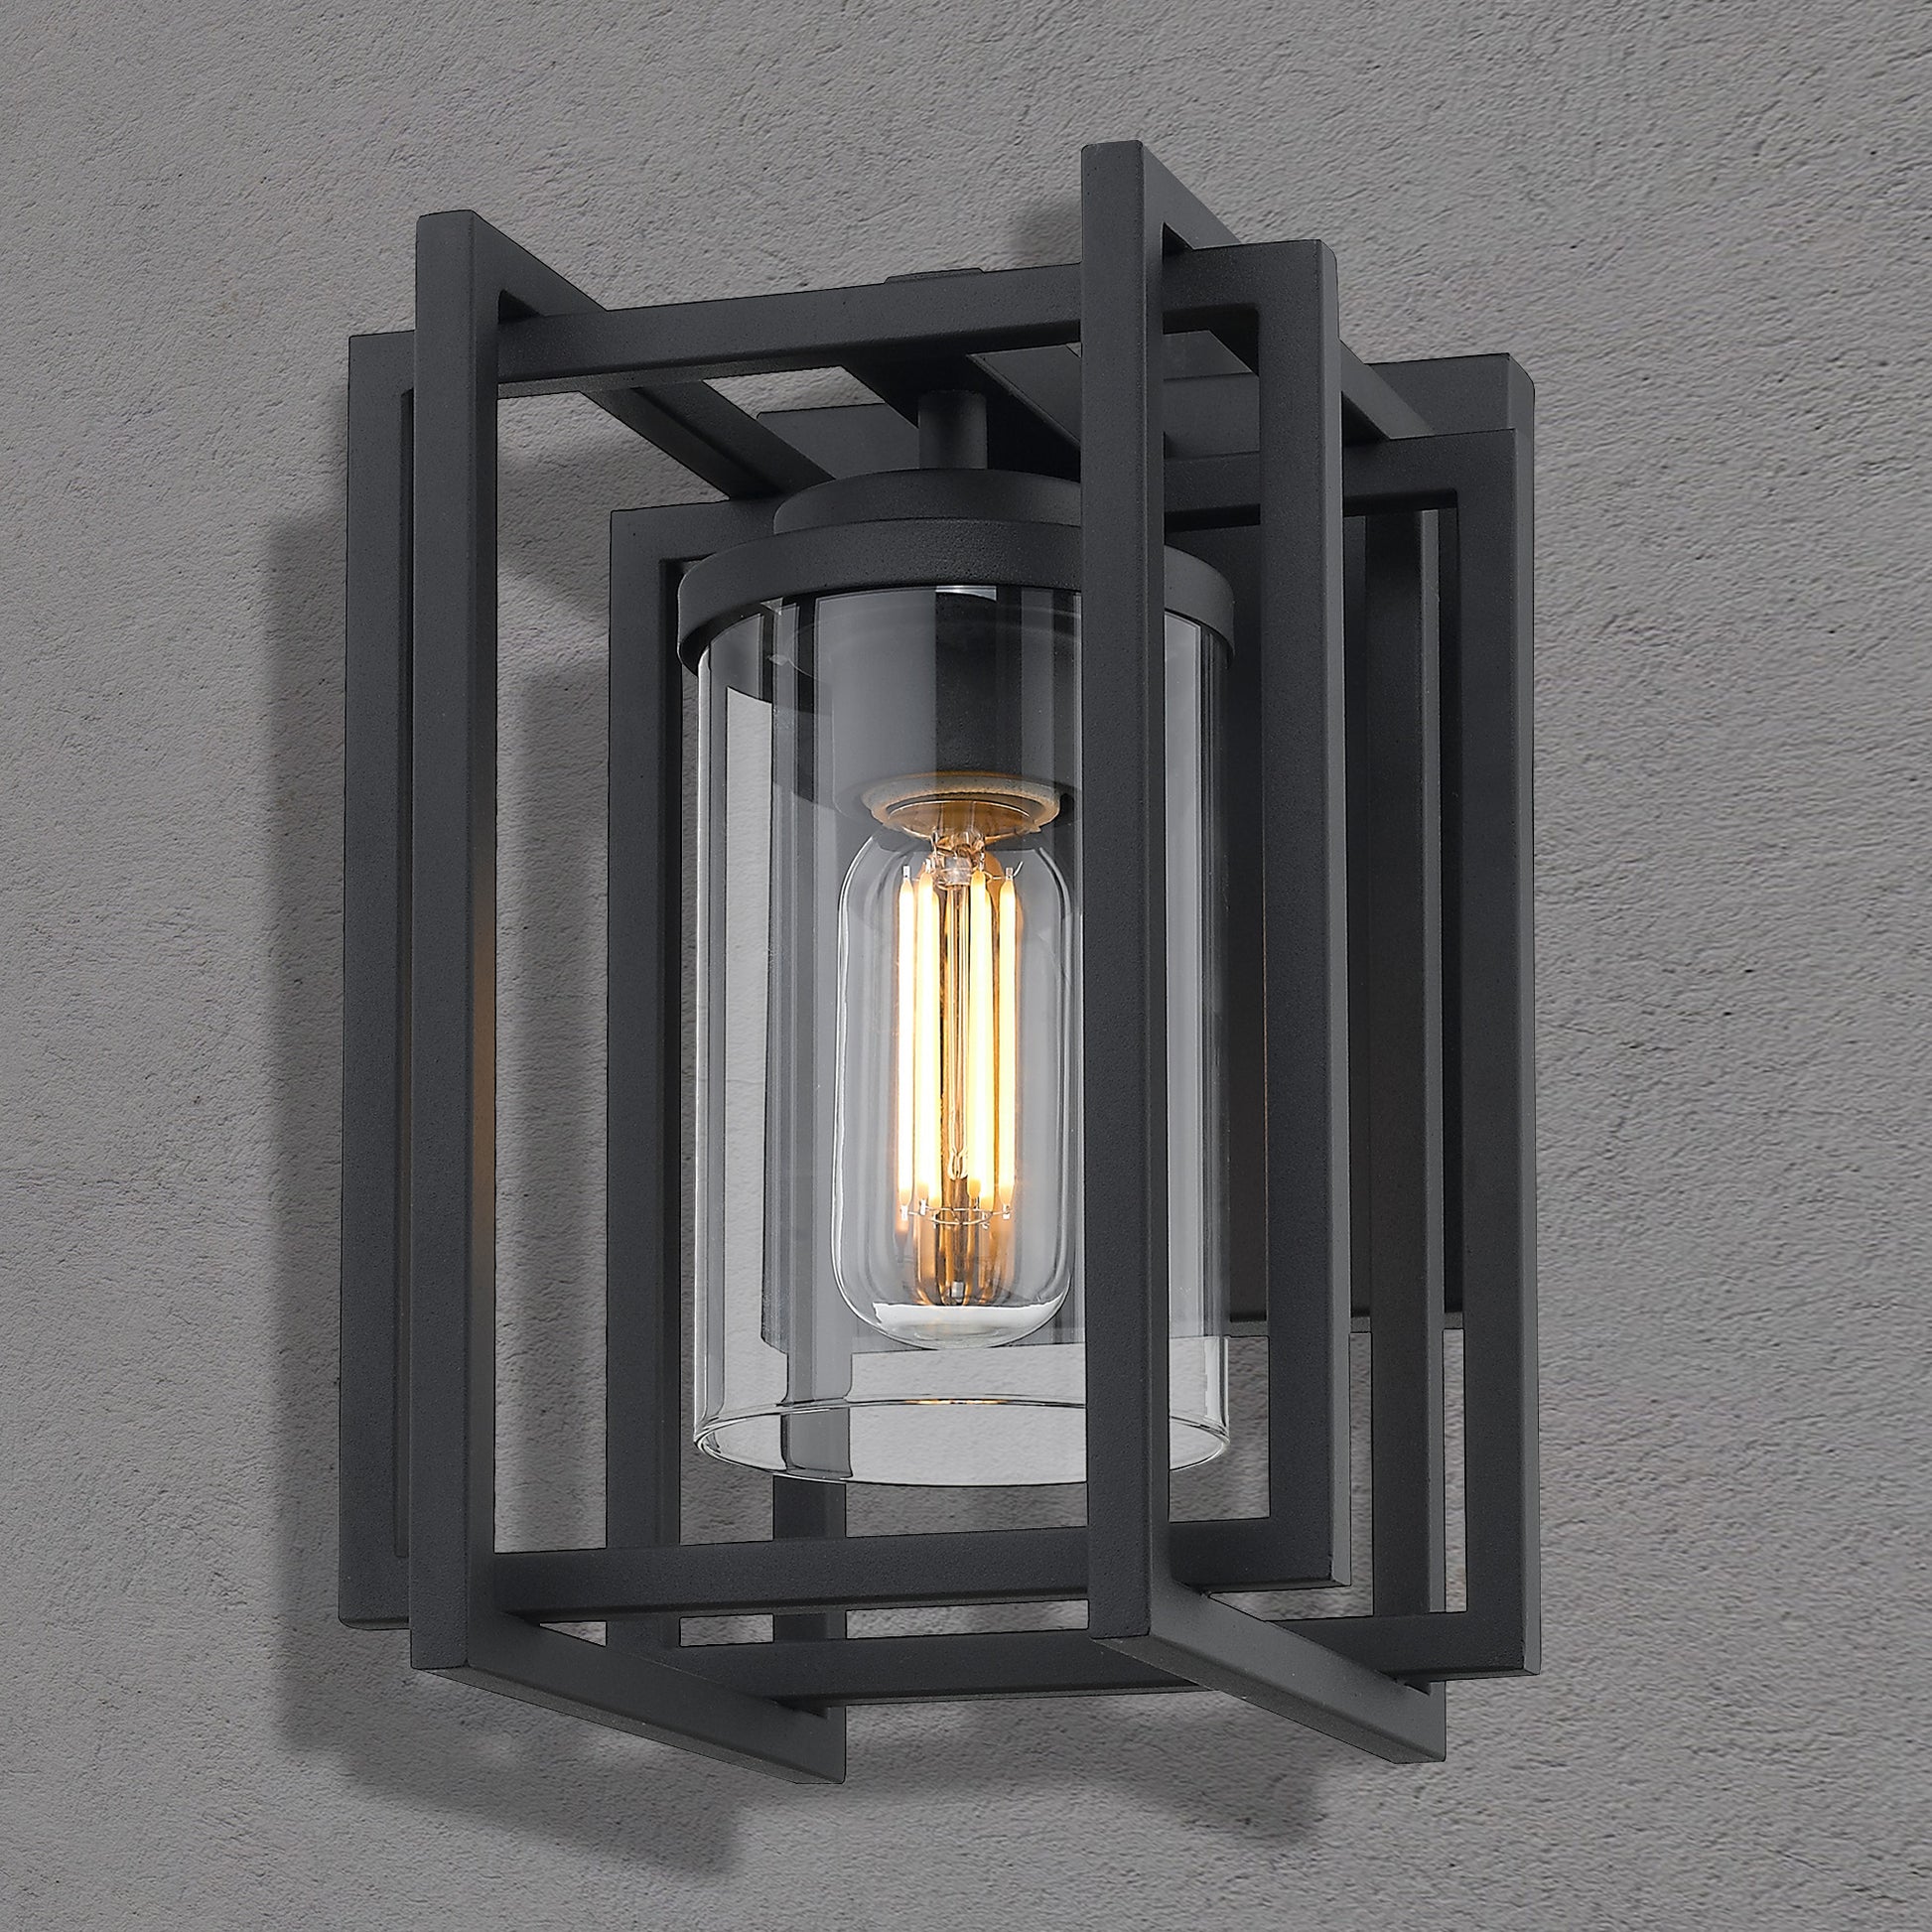 Modern | Industrial-Inspired Small Outdoor Wall Sconce with dark background